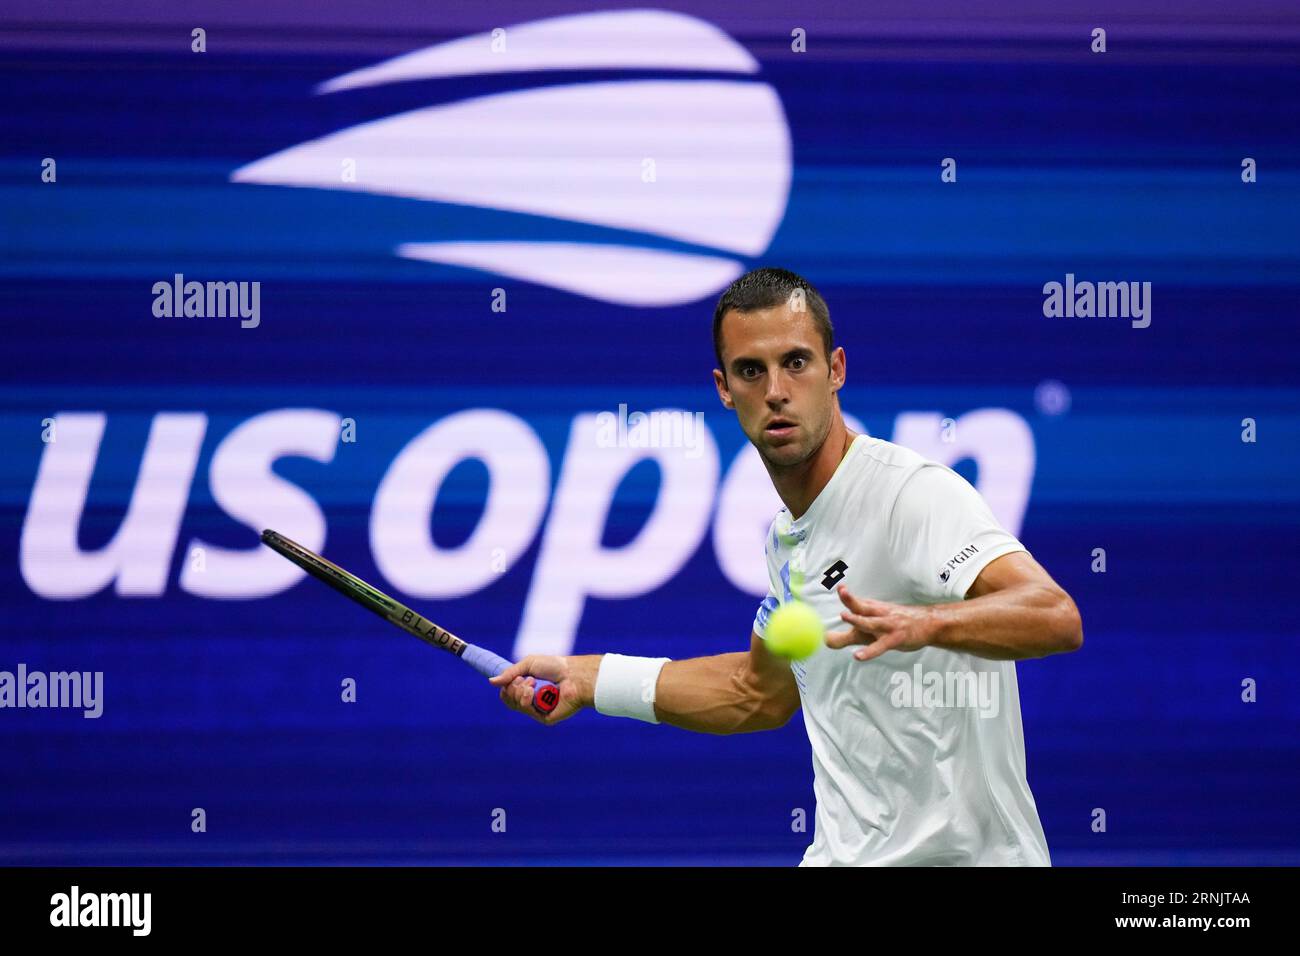 Laslo Djere, of Serbia, returns a shot to Novak Djokovic, of Serbia, during the third round of the U.S. Open tennis championships, Friday, Sept